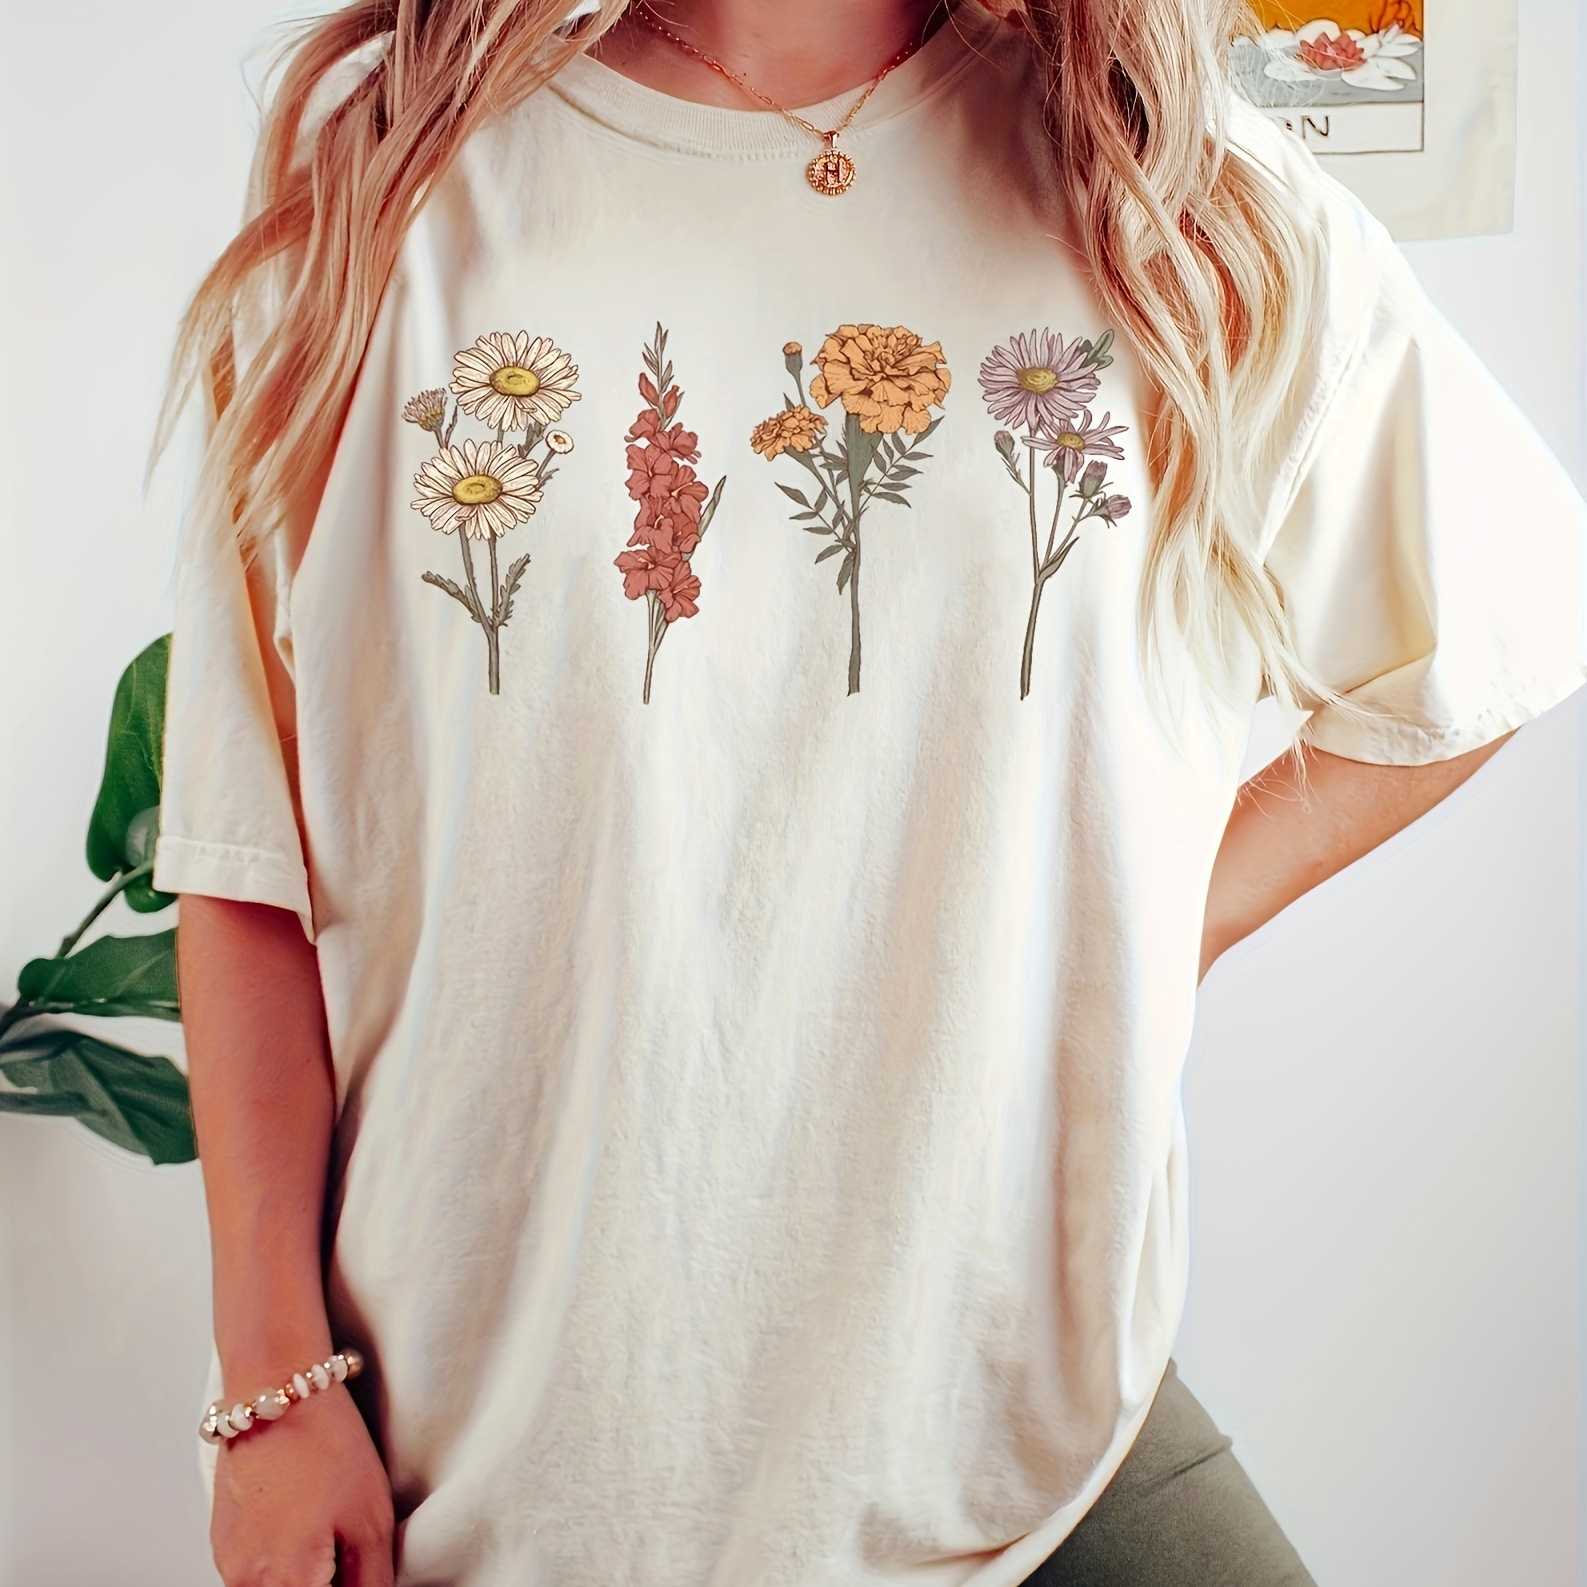 

Plus Size Floral Print T-shirt, Short Sleeve Crew Neck Casual Top For Summer & Spring, Women's Plus Size Clothing